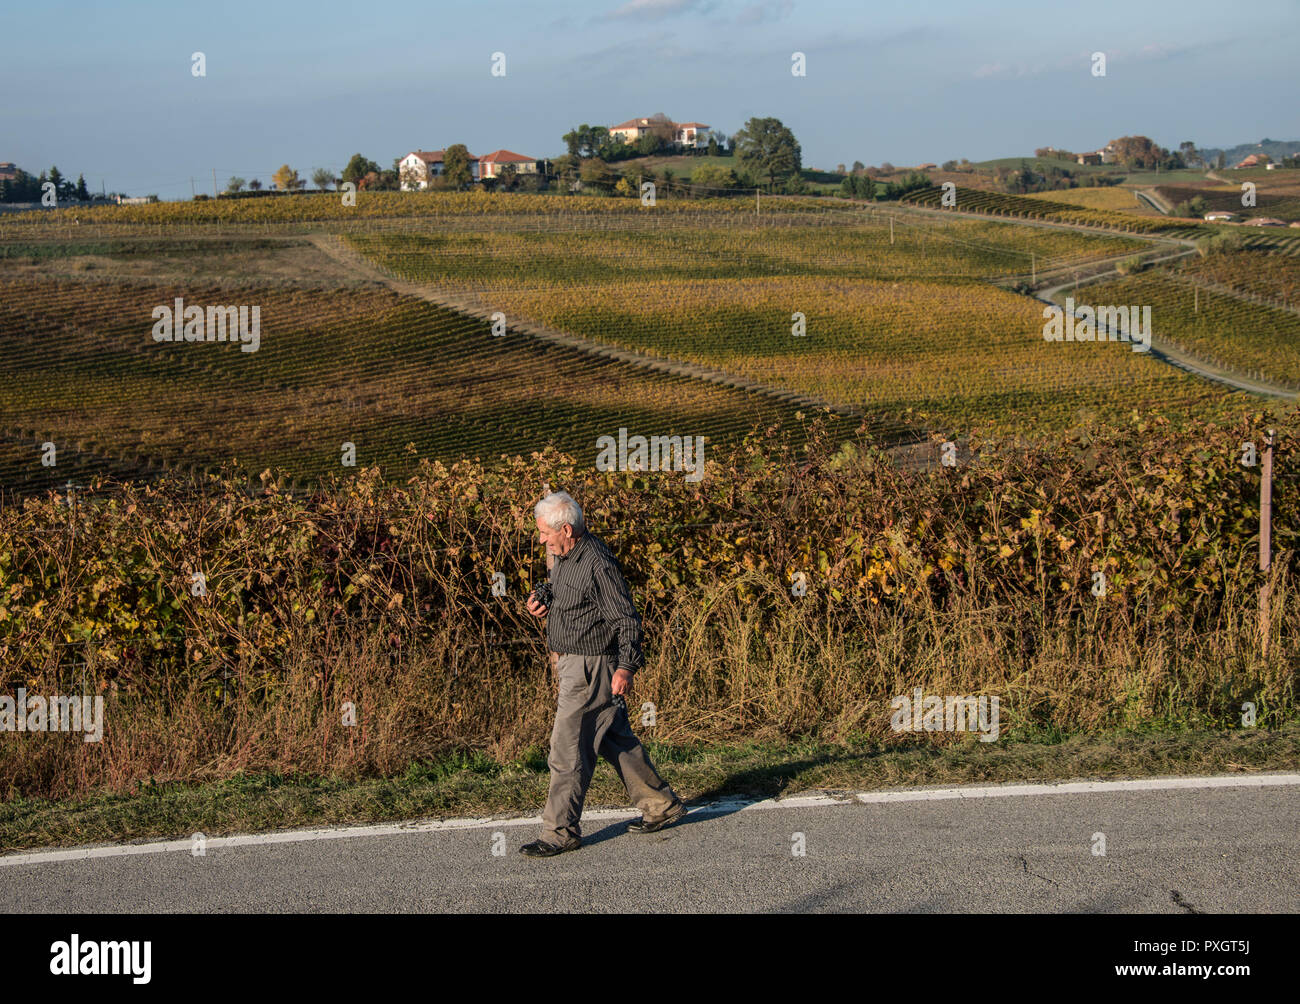 View over the vineyards just outside the small town of Monferrato in Piedmont, Italy. A man picks some of the grapes left over on the vines. Stock Photo